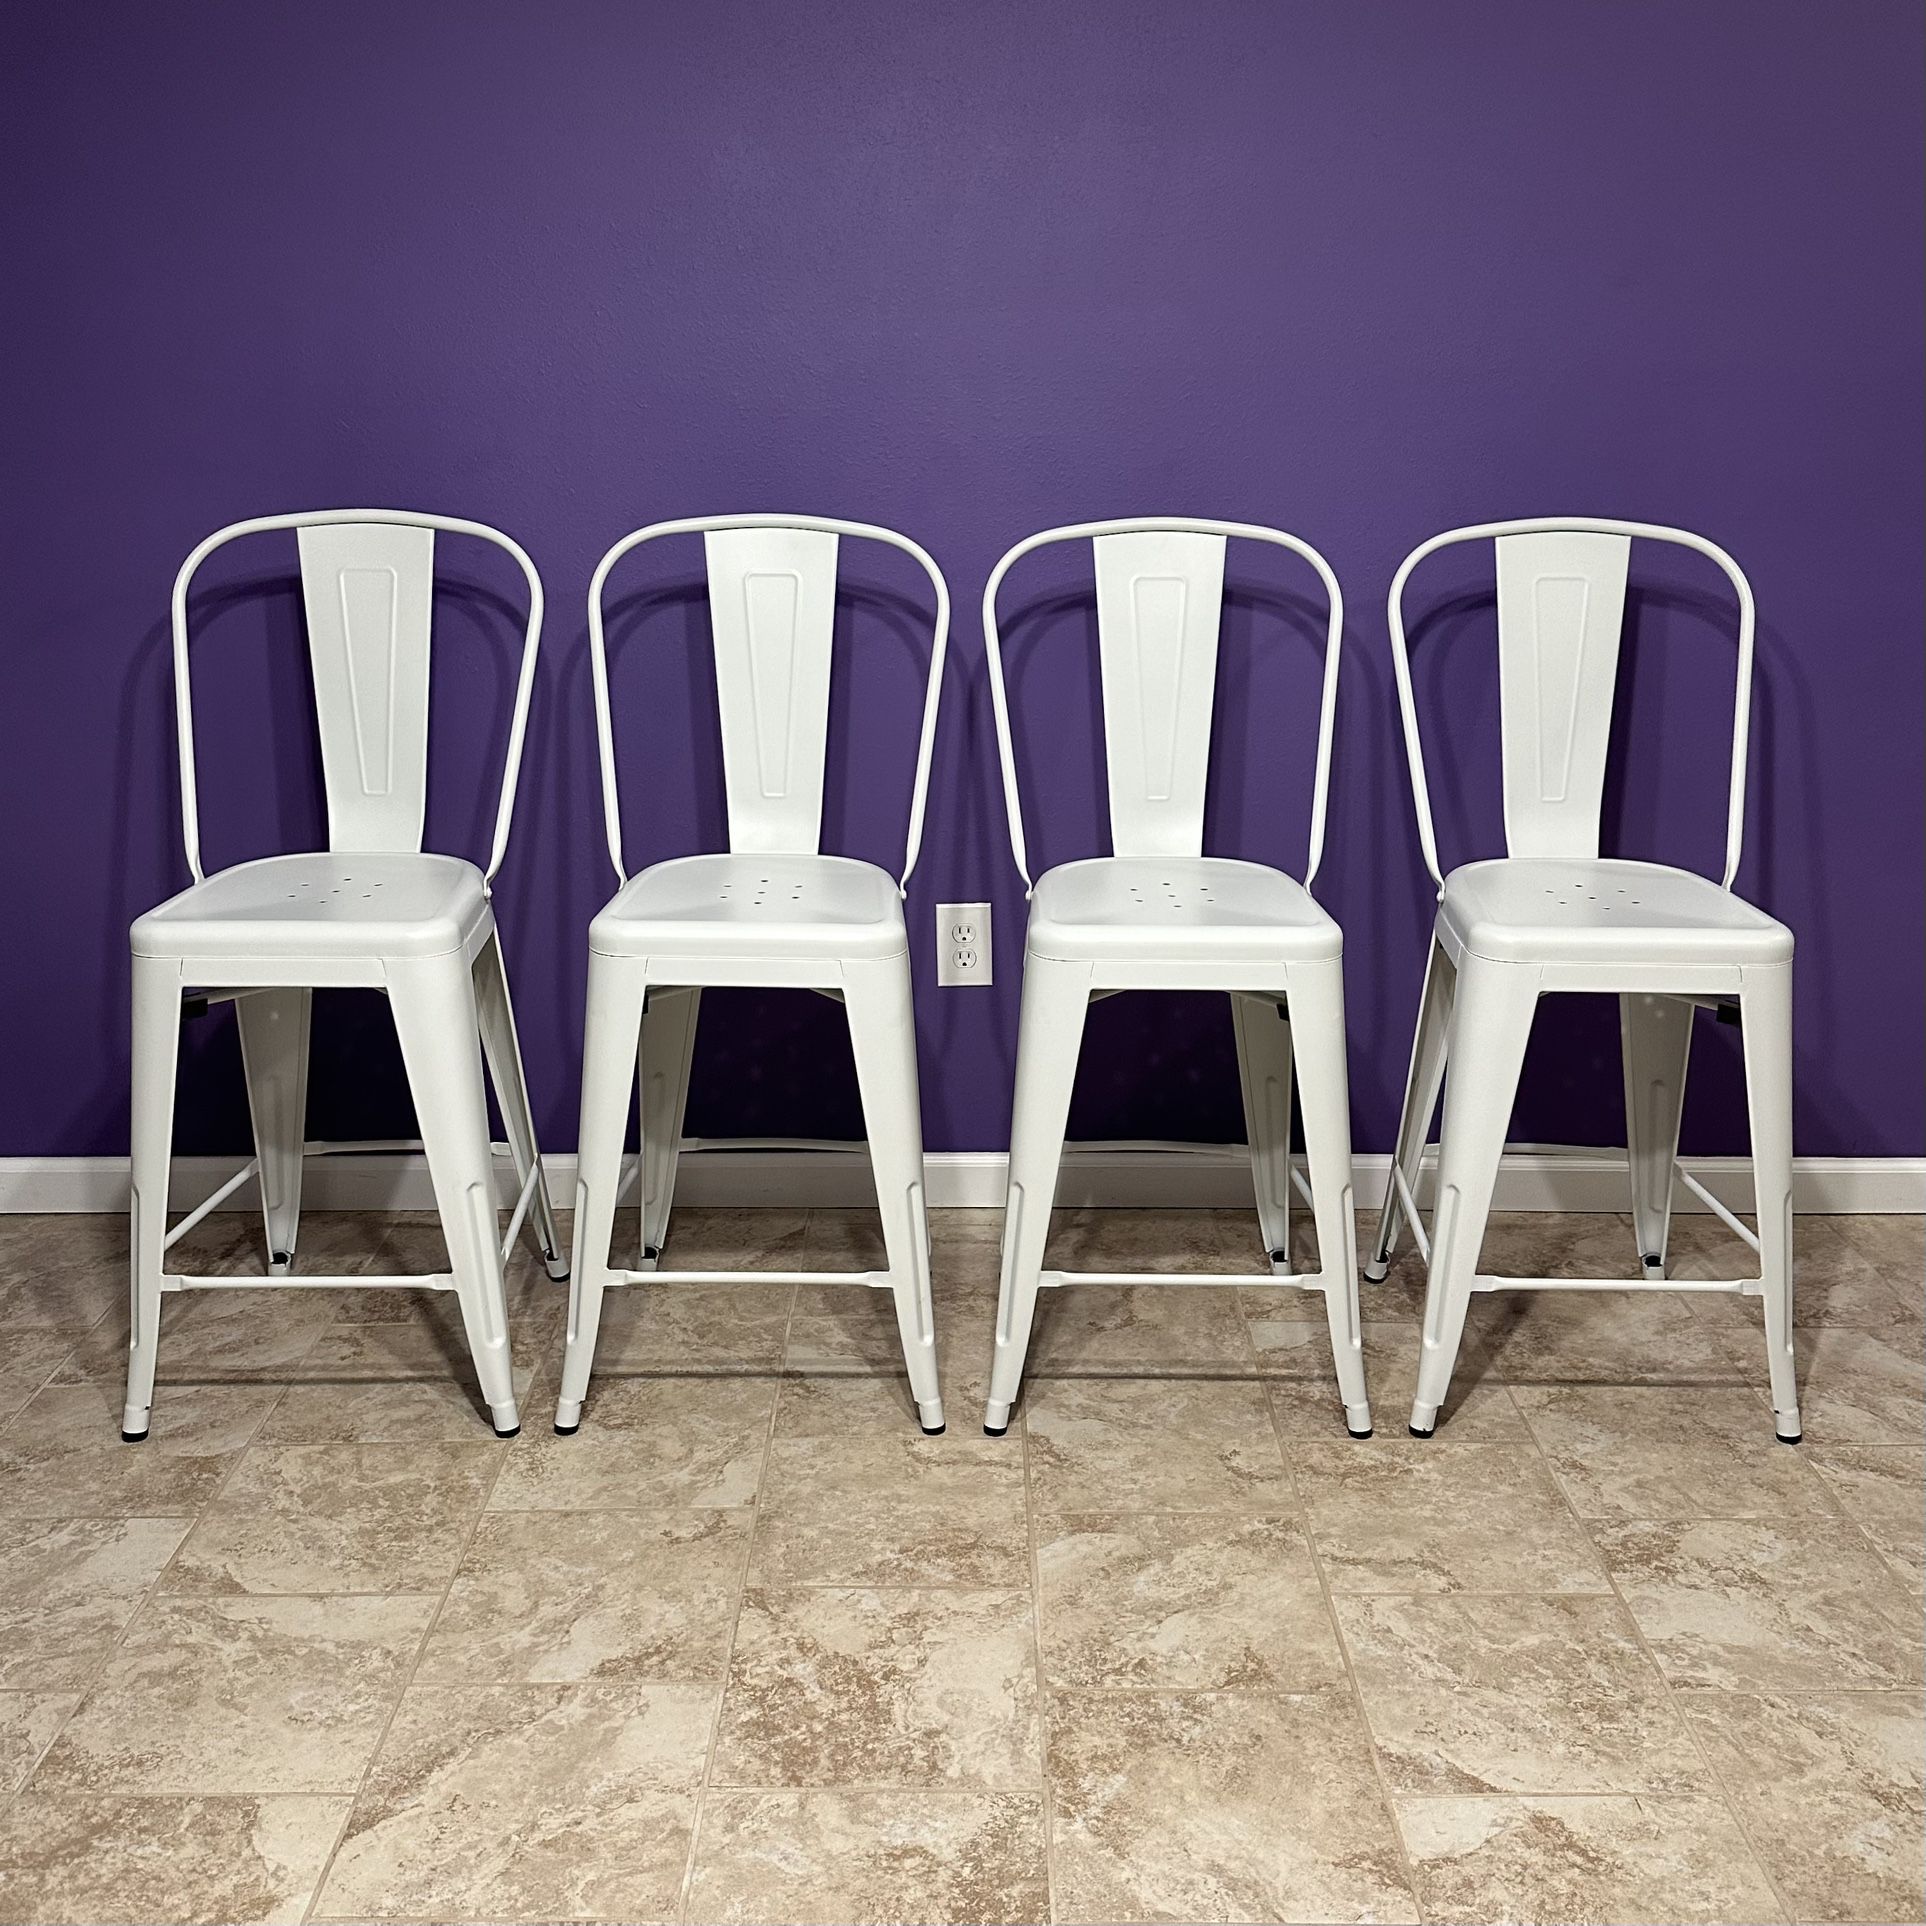 New 4 White Metal Counter Height Dining Chairs (Can Deliver) 